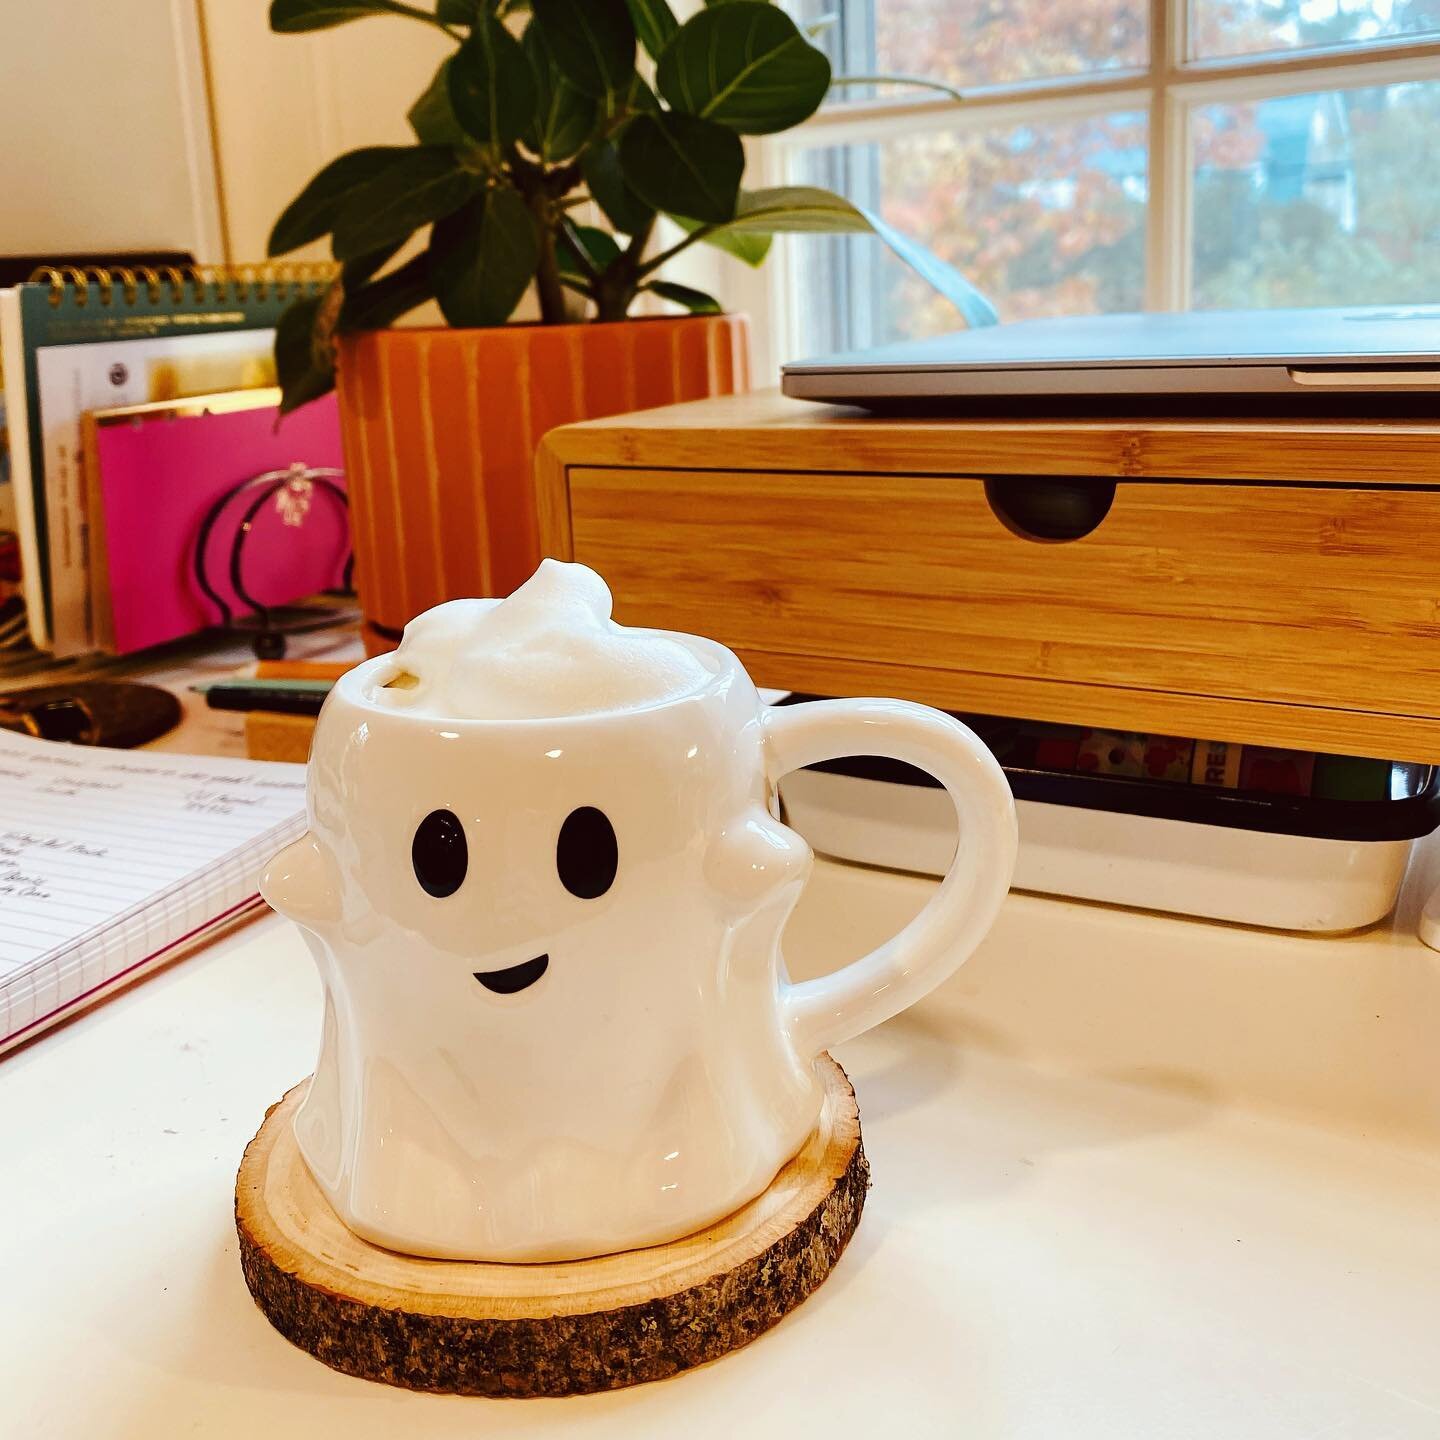 The cutest little ghost friend is joining me today. 👻